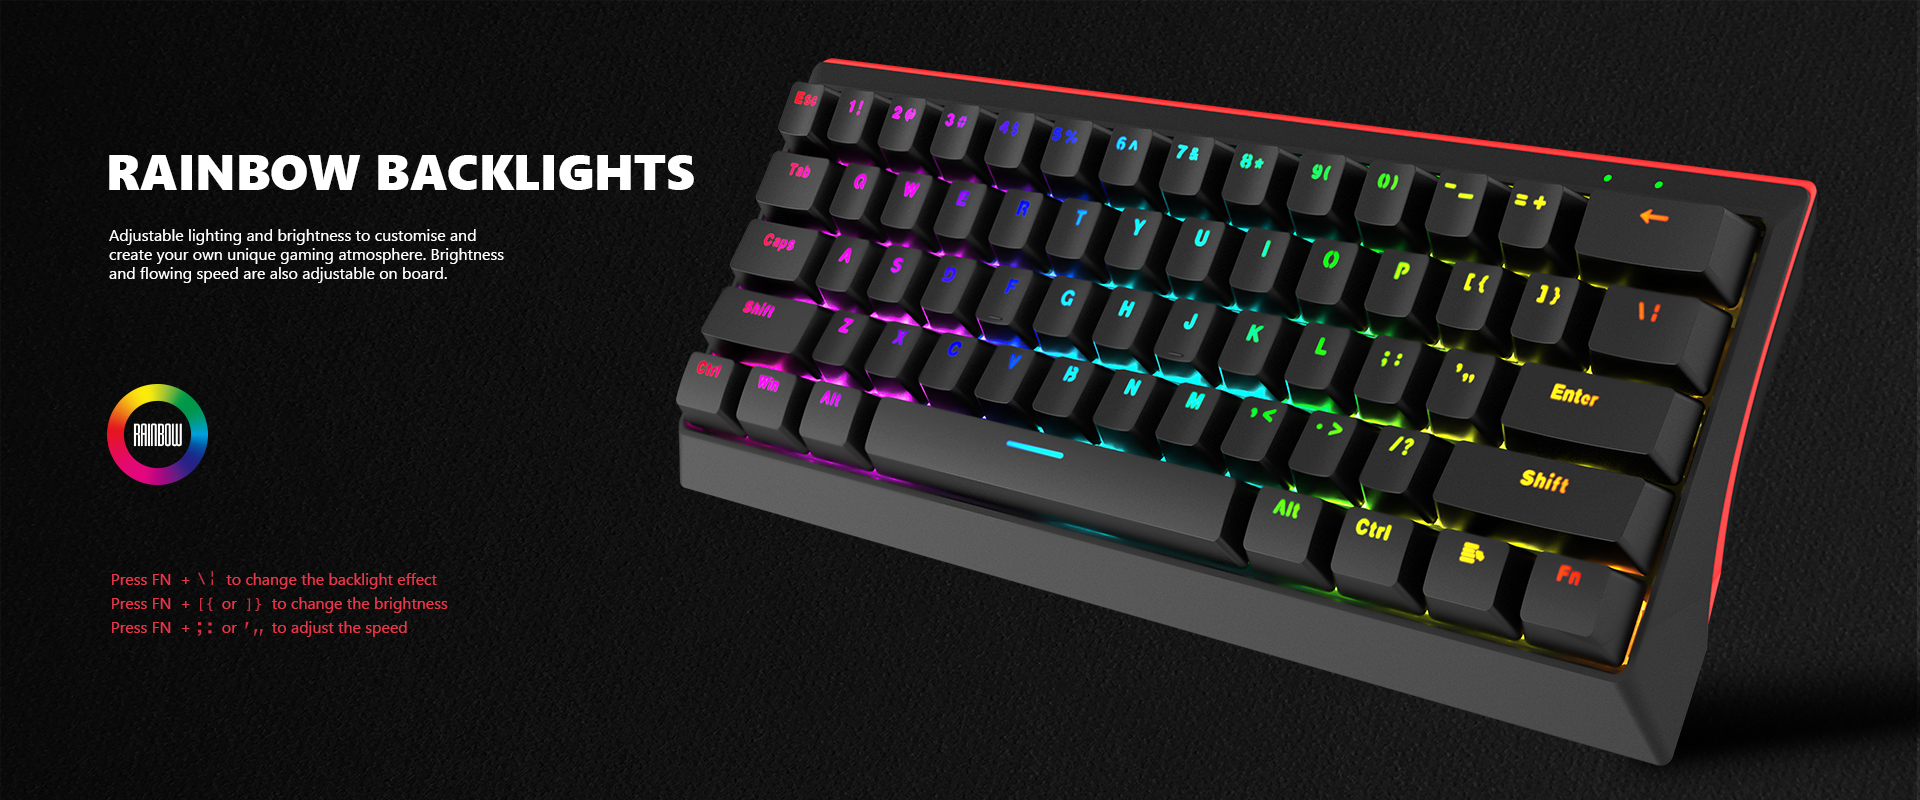 KG962_61_Keys_Mechanical_Gaming_Keyboard_with_Detachable_USB_Type-C_Cable_PC_5.png